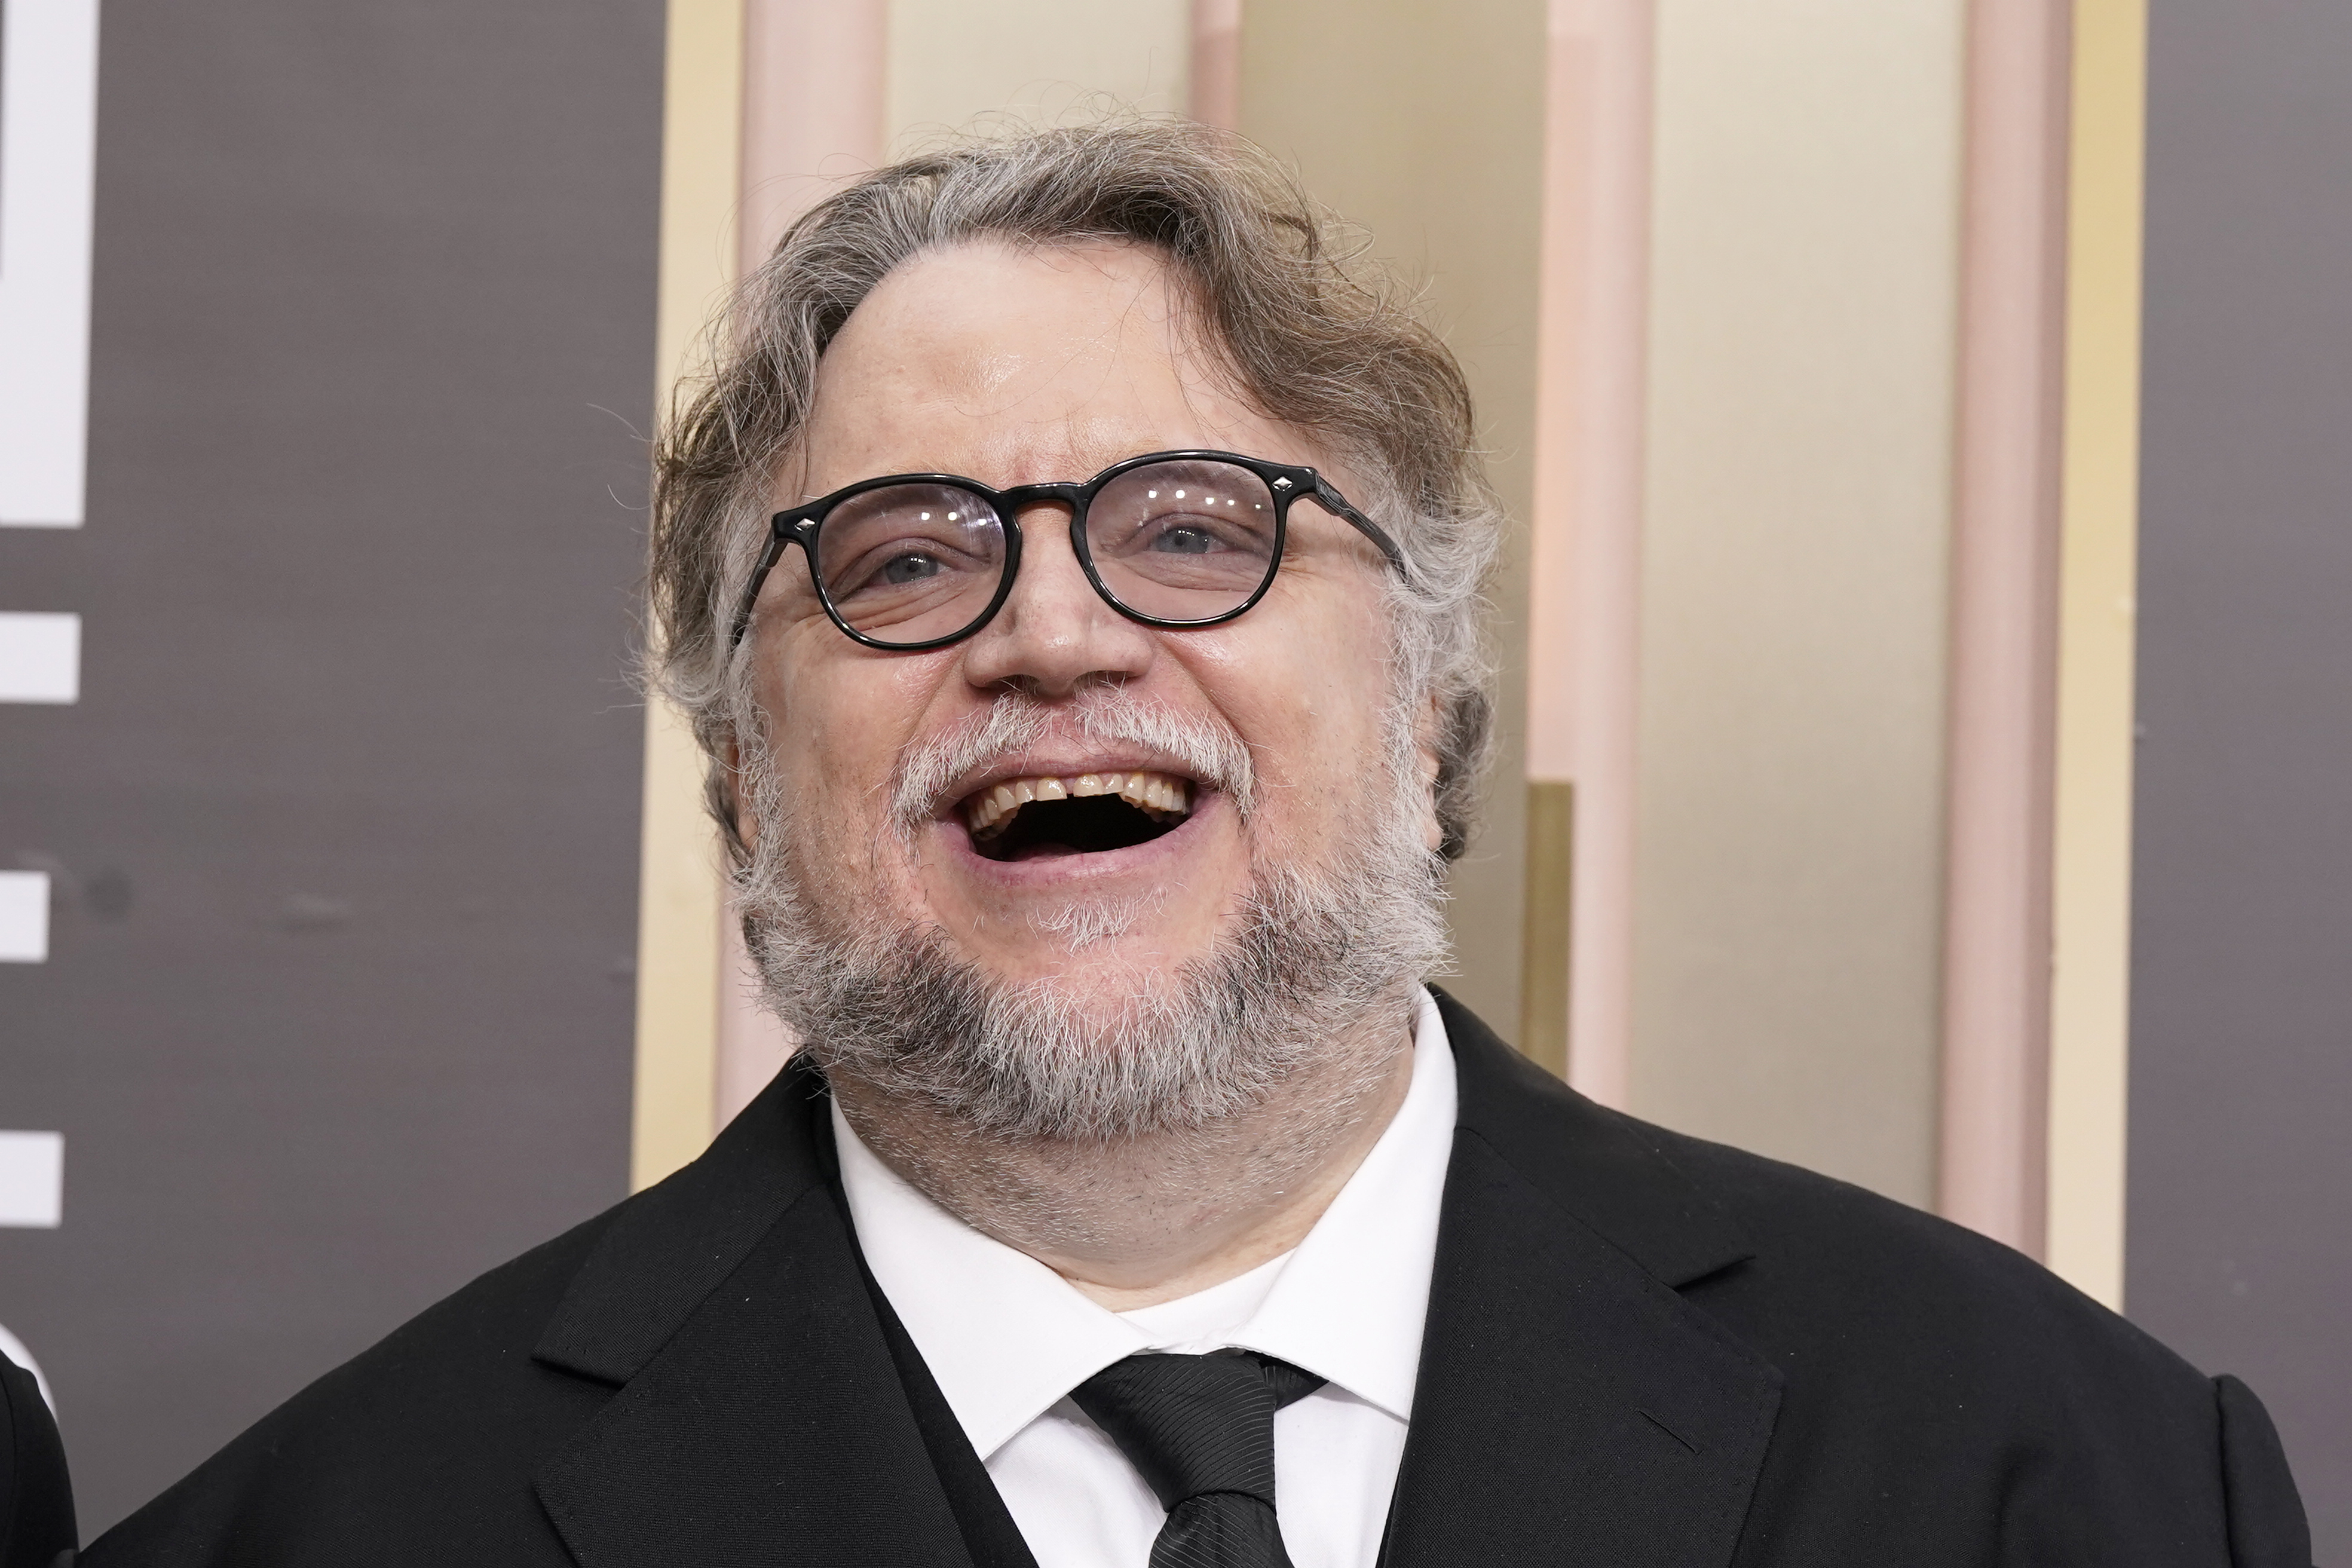 Guillermo del Toro arrives at the 80th annual Golden Globe Awards at the Beverly Hilton Hotel on January 10, 2023, in Beverly Hills, California.(Photo Jordan Strauss/Invision/AP)